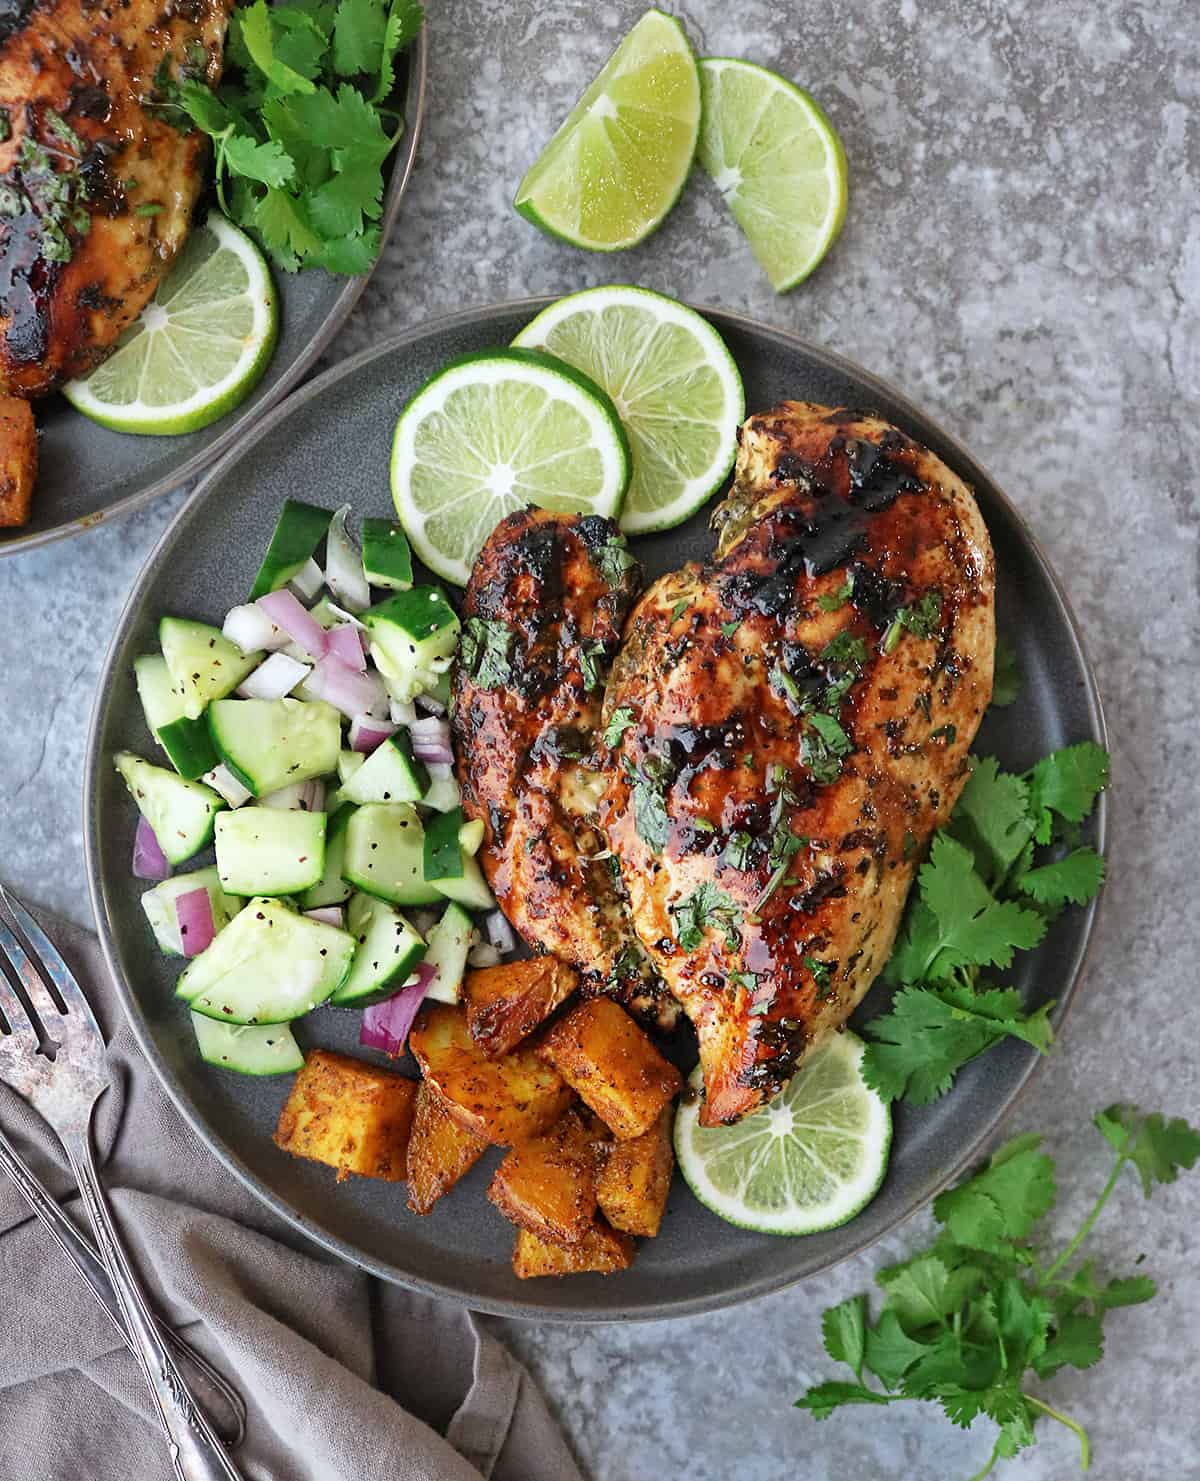 This Cilantro Lime Chicken packs a deliciously fresh, tangy, and garlicky punch that will have your taste-buds singing! This quick and easy grilled Cilantro Lime Chicken is a versatile recipe that will have you coming back for more.